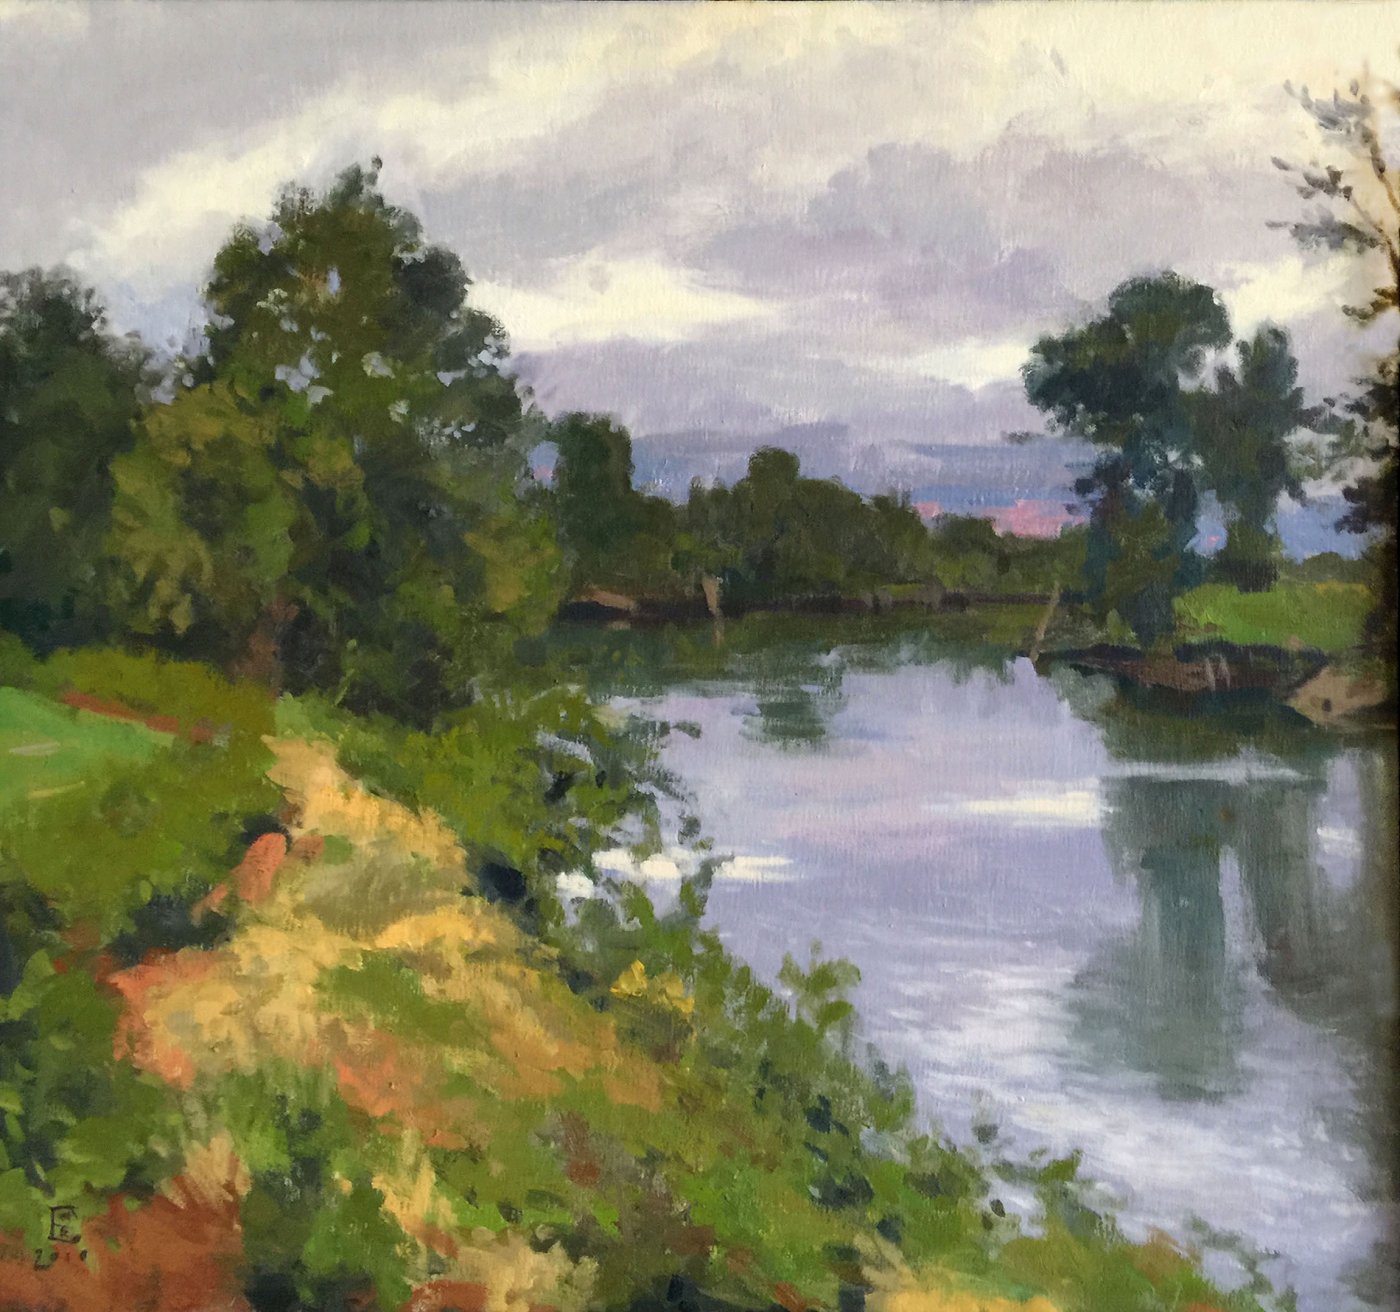 Bend In The River, oil on canvas, 30 x 32 inches, copyright ©2010